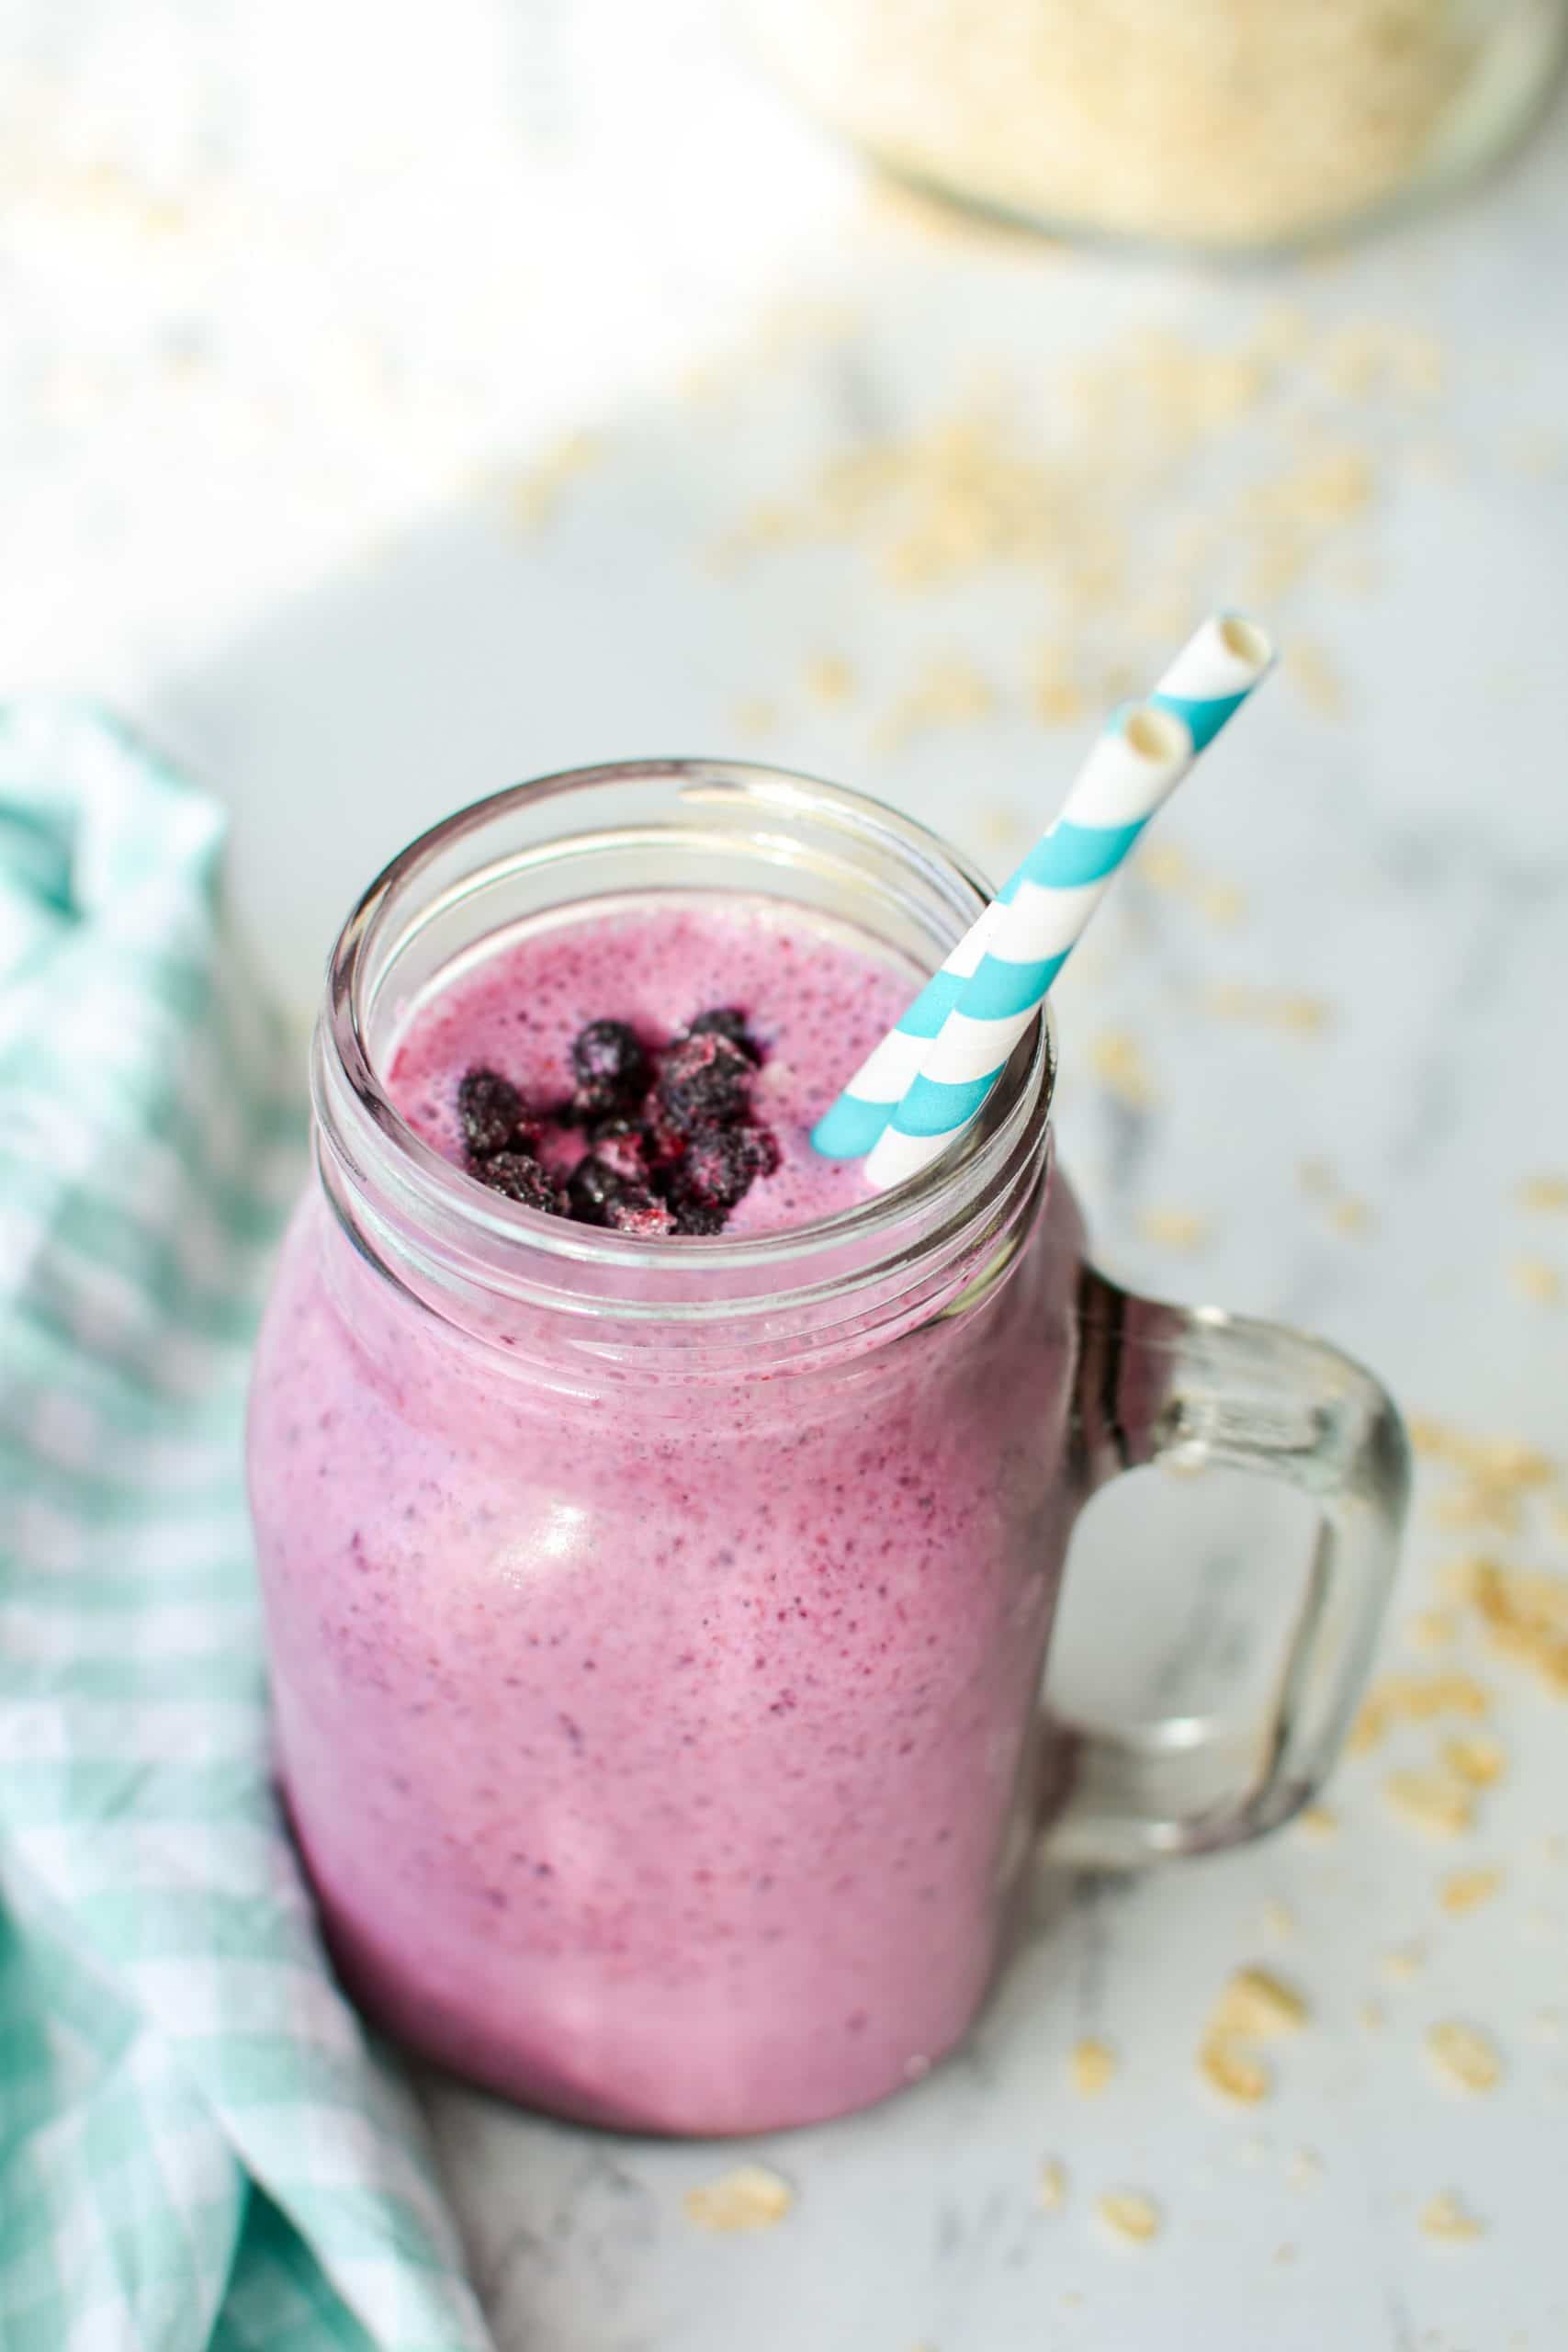 A jar style cup of blueberry kefir smoothie